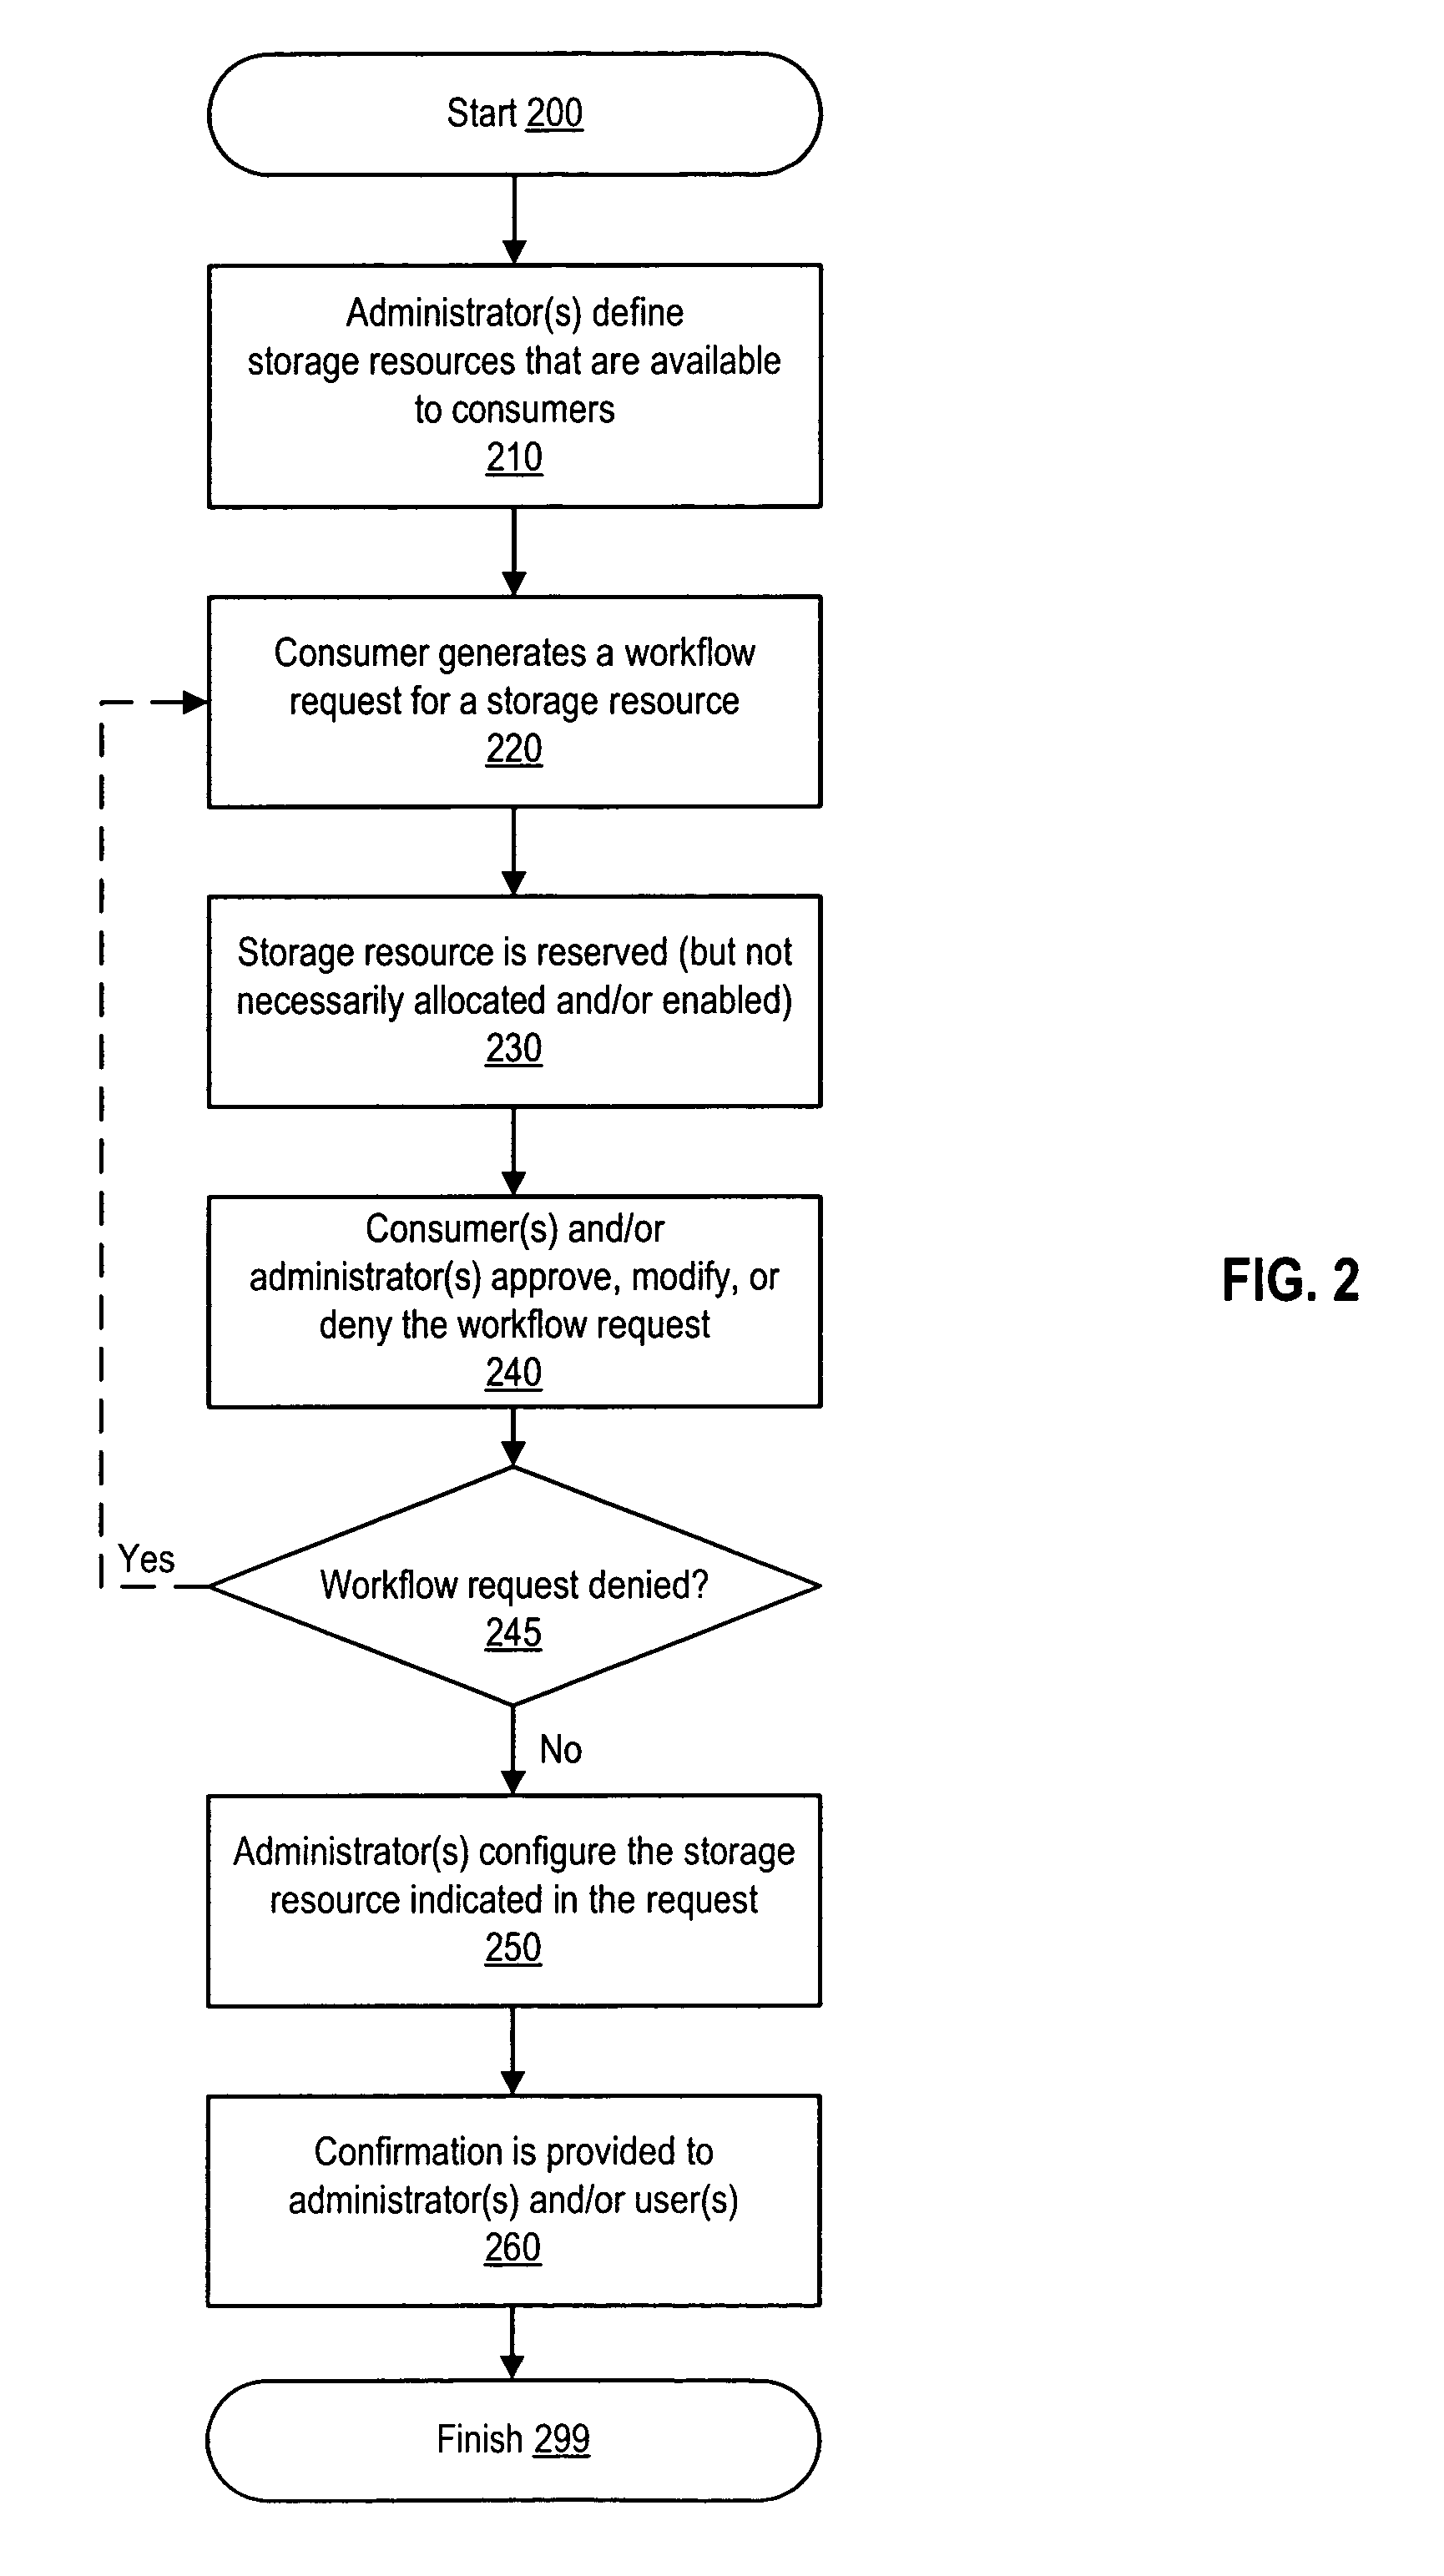 Workflow process with temporary storage resource reservation